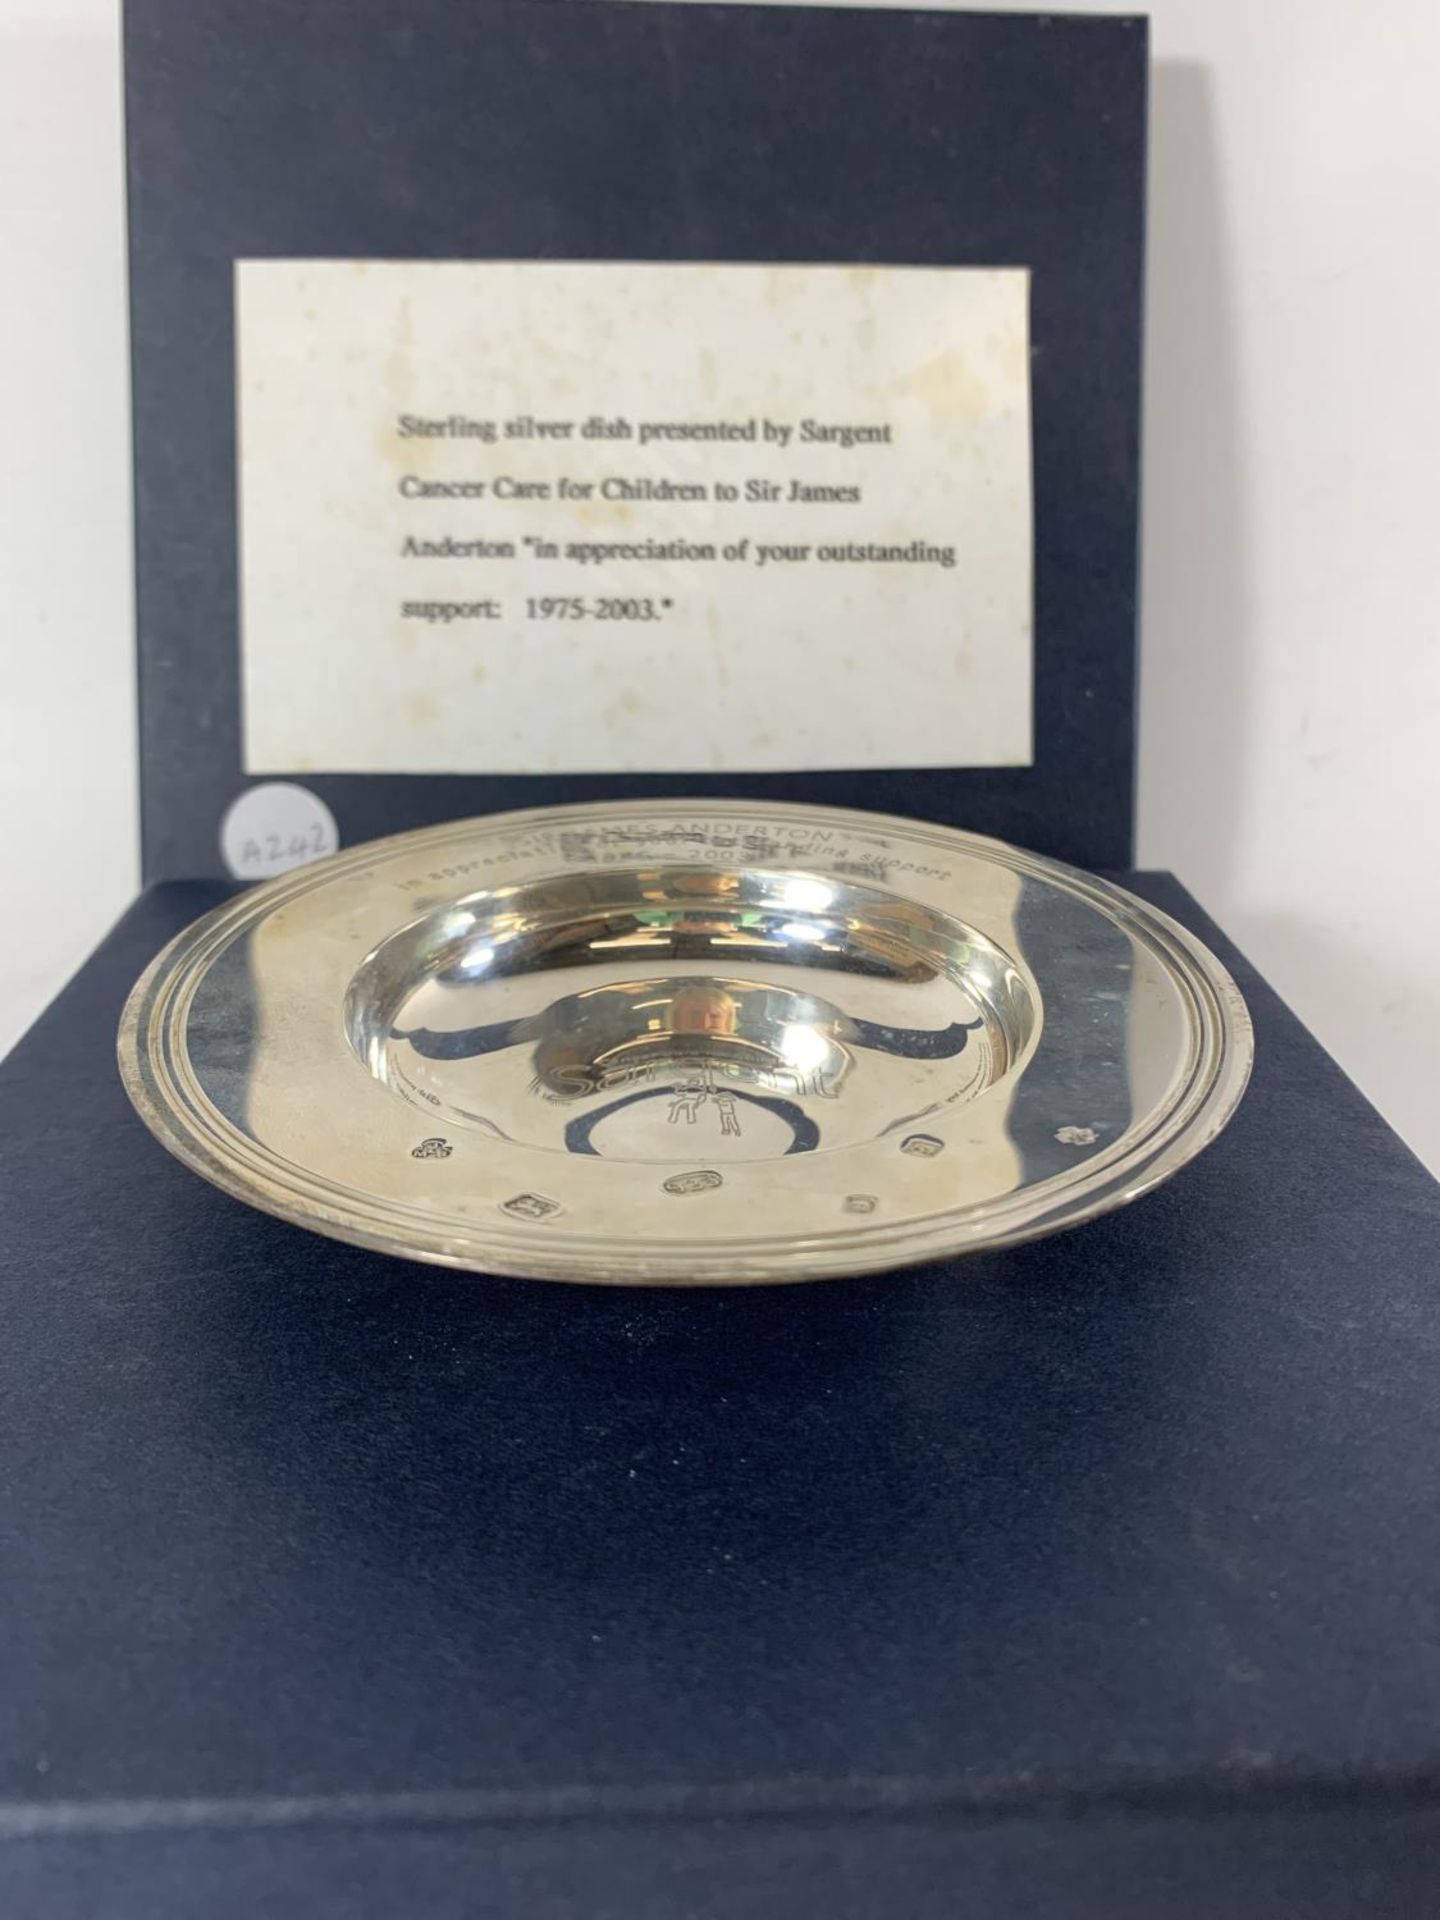 * A HALLMARKED SILVER PRESENTATION ARMADA DISH, PRESENTED BY CANCER CARE FOR CHILDREN 2003, LONDON - Image 2 of 3